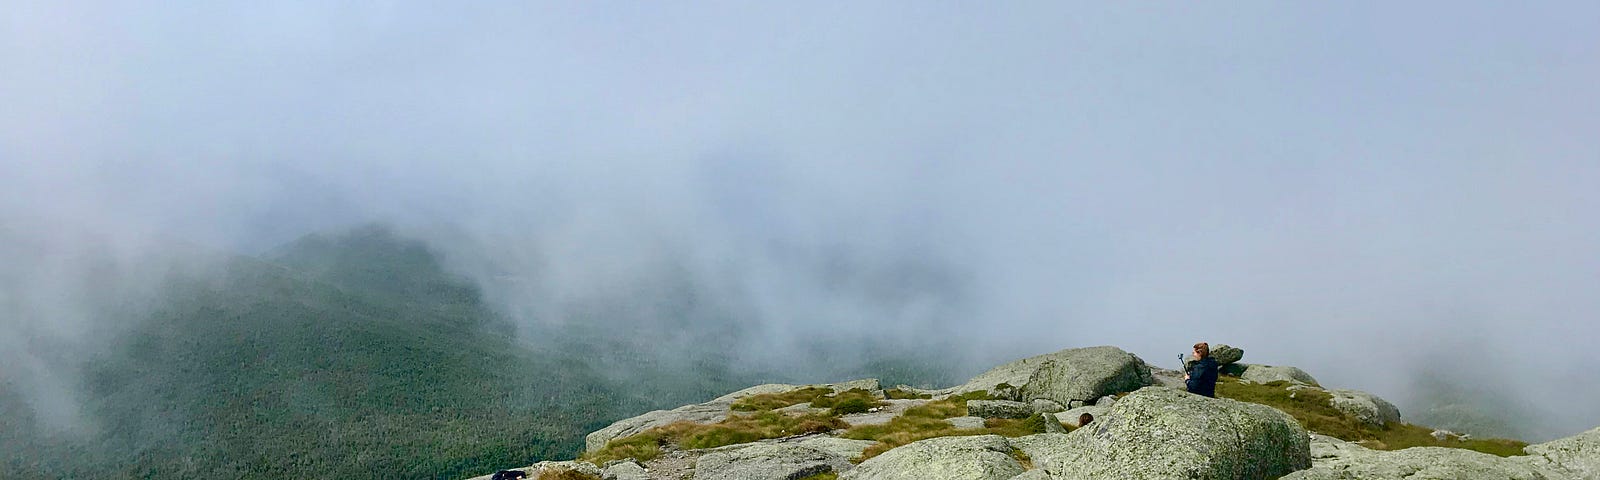 View from mountaintop mostly shrouded in clouds